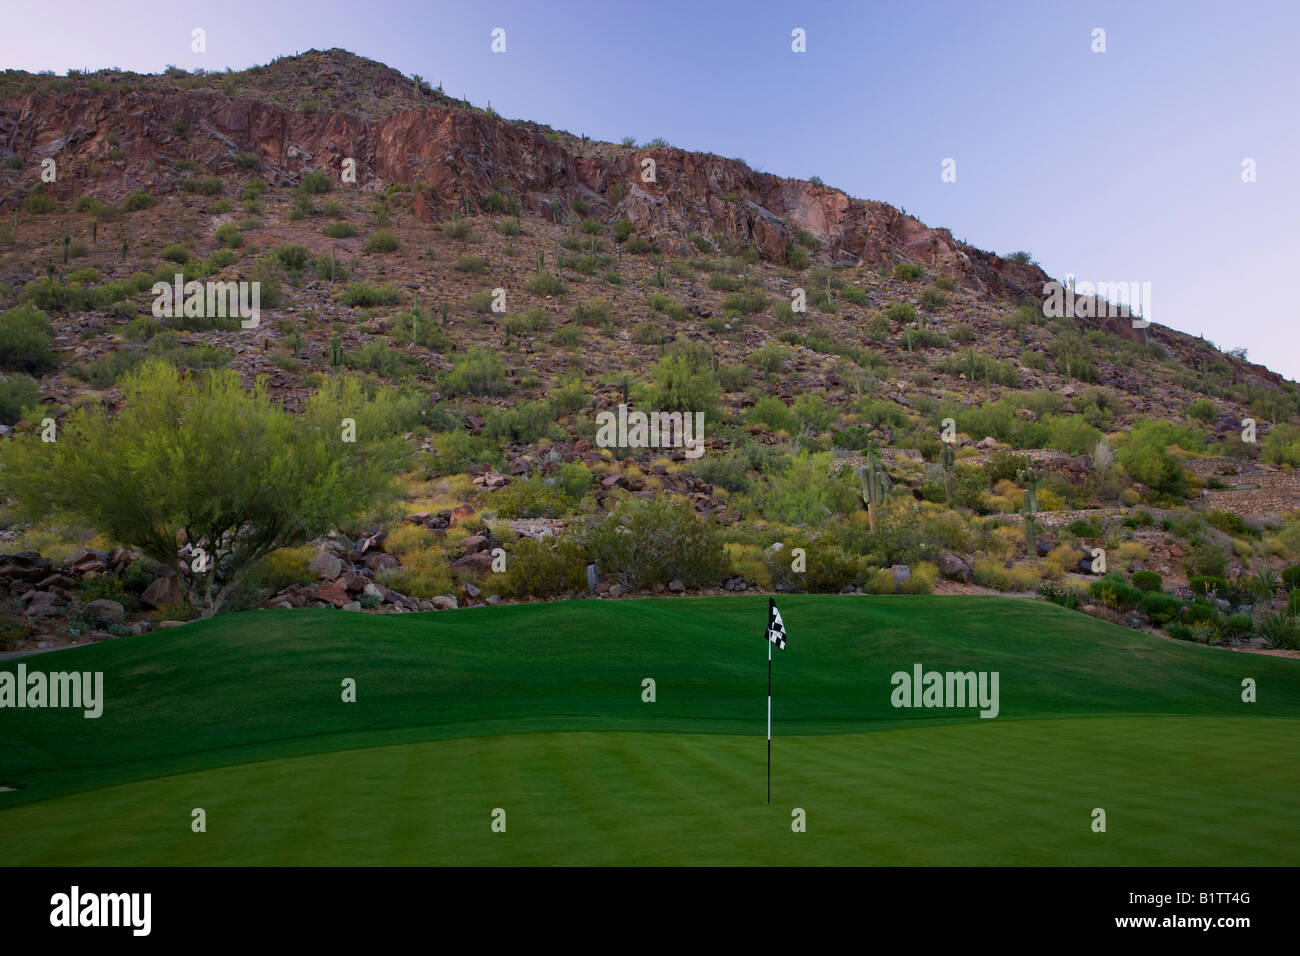 The 8th hole on the Desert Golf Course at the Phoenician Resort in Scottsdale Arizona Stock Photo